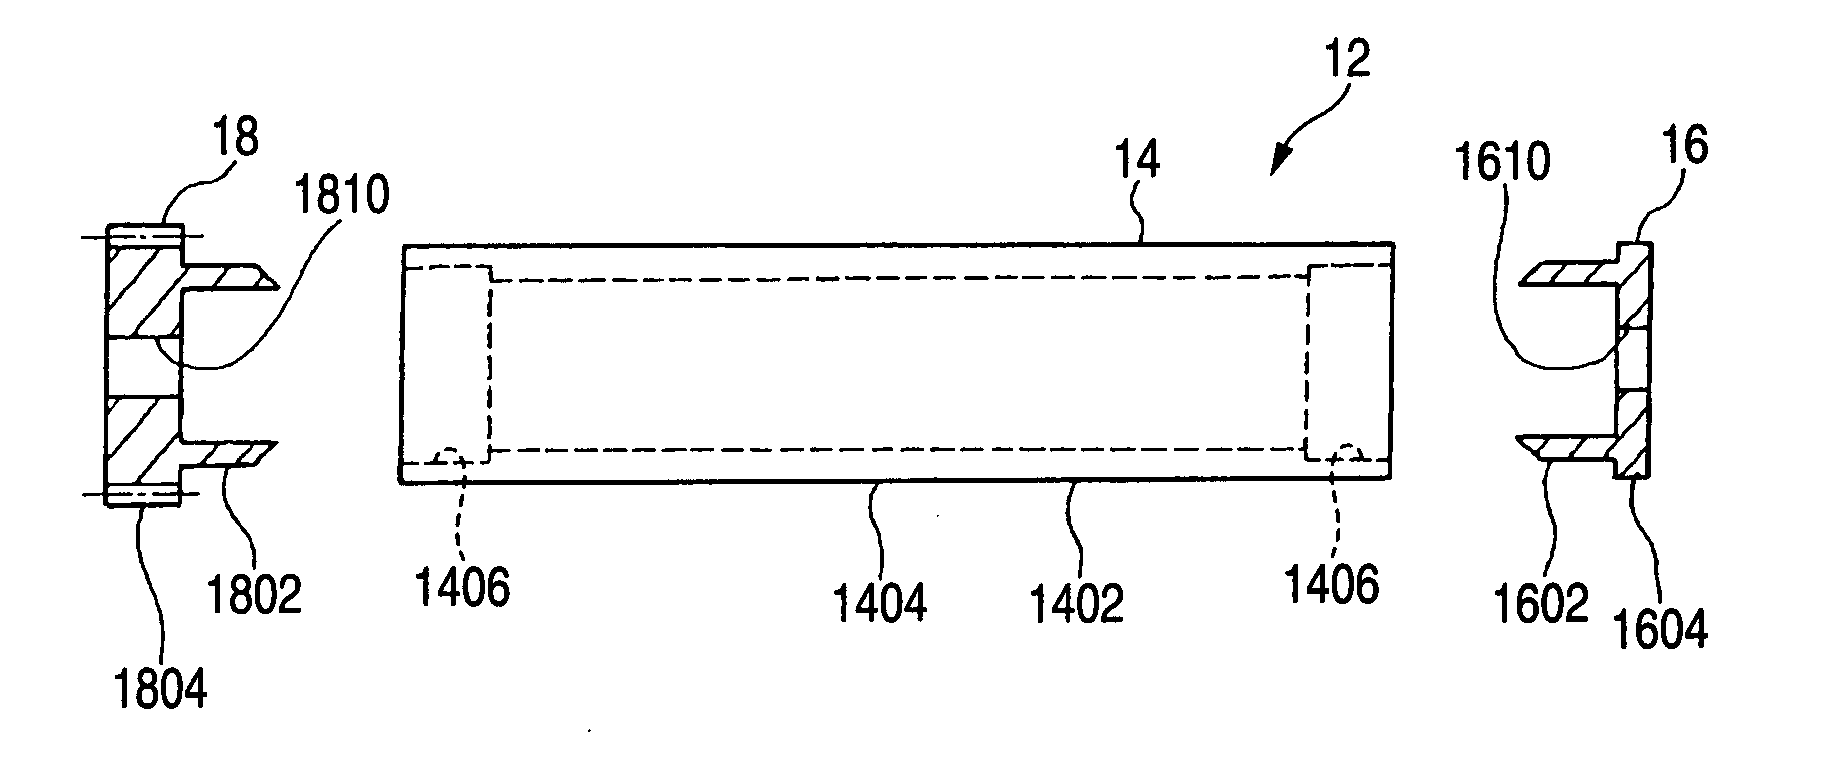 Photoreceptor drums, methods and apparatus for assembling the same, and image-forming apparatus employing the same